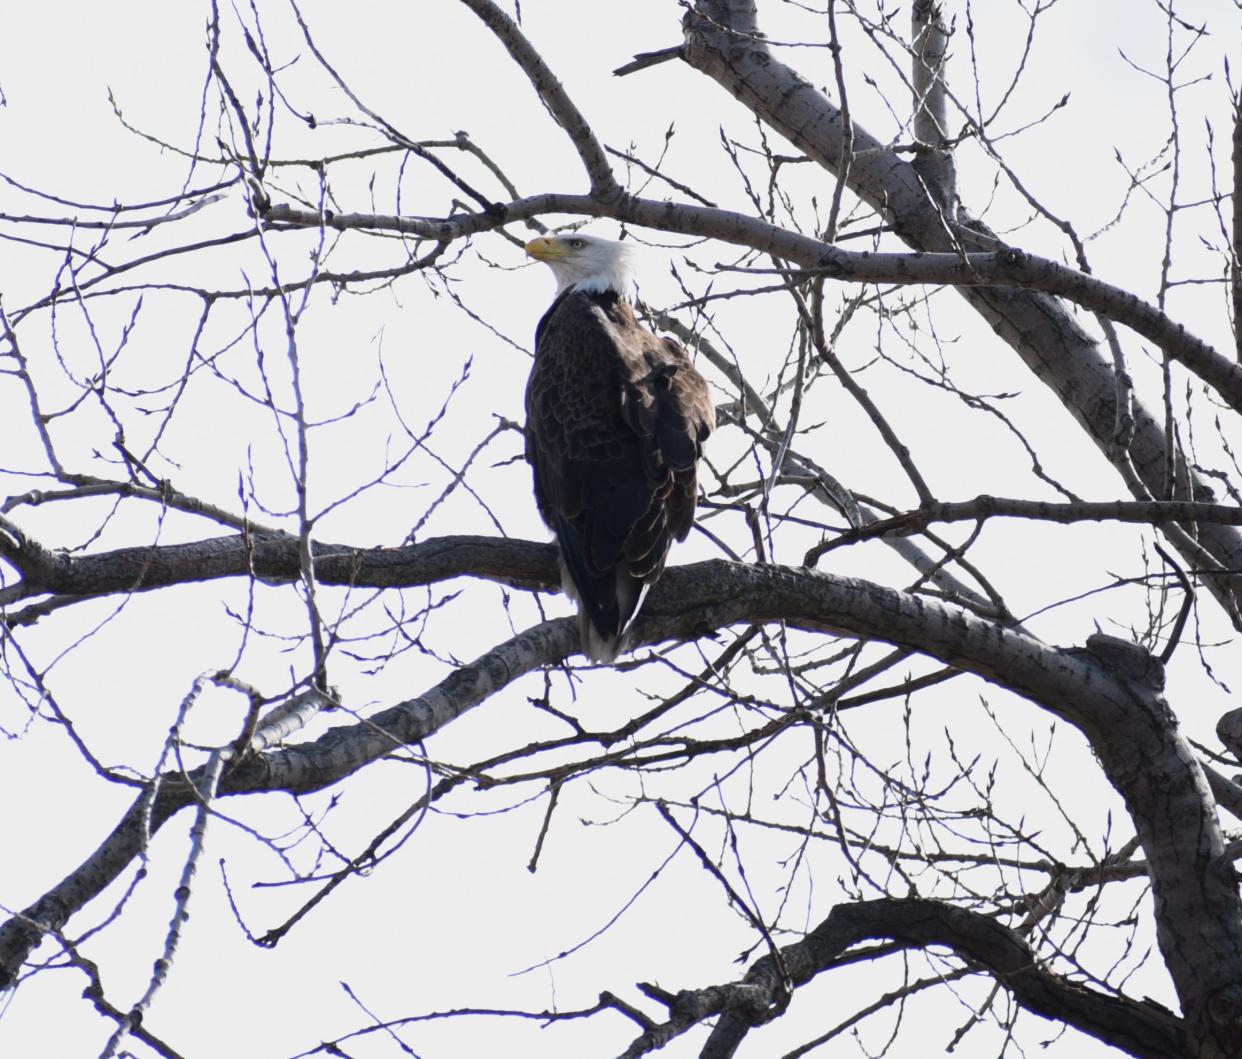 Once an endangered species, bald eagles have rebounded and even flourished in Ottawa County.